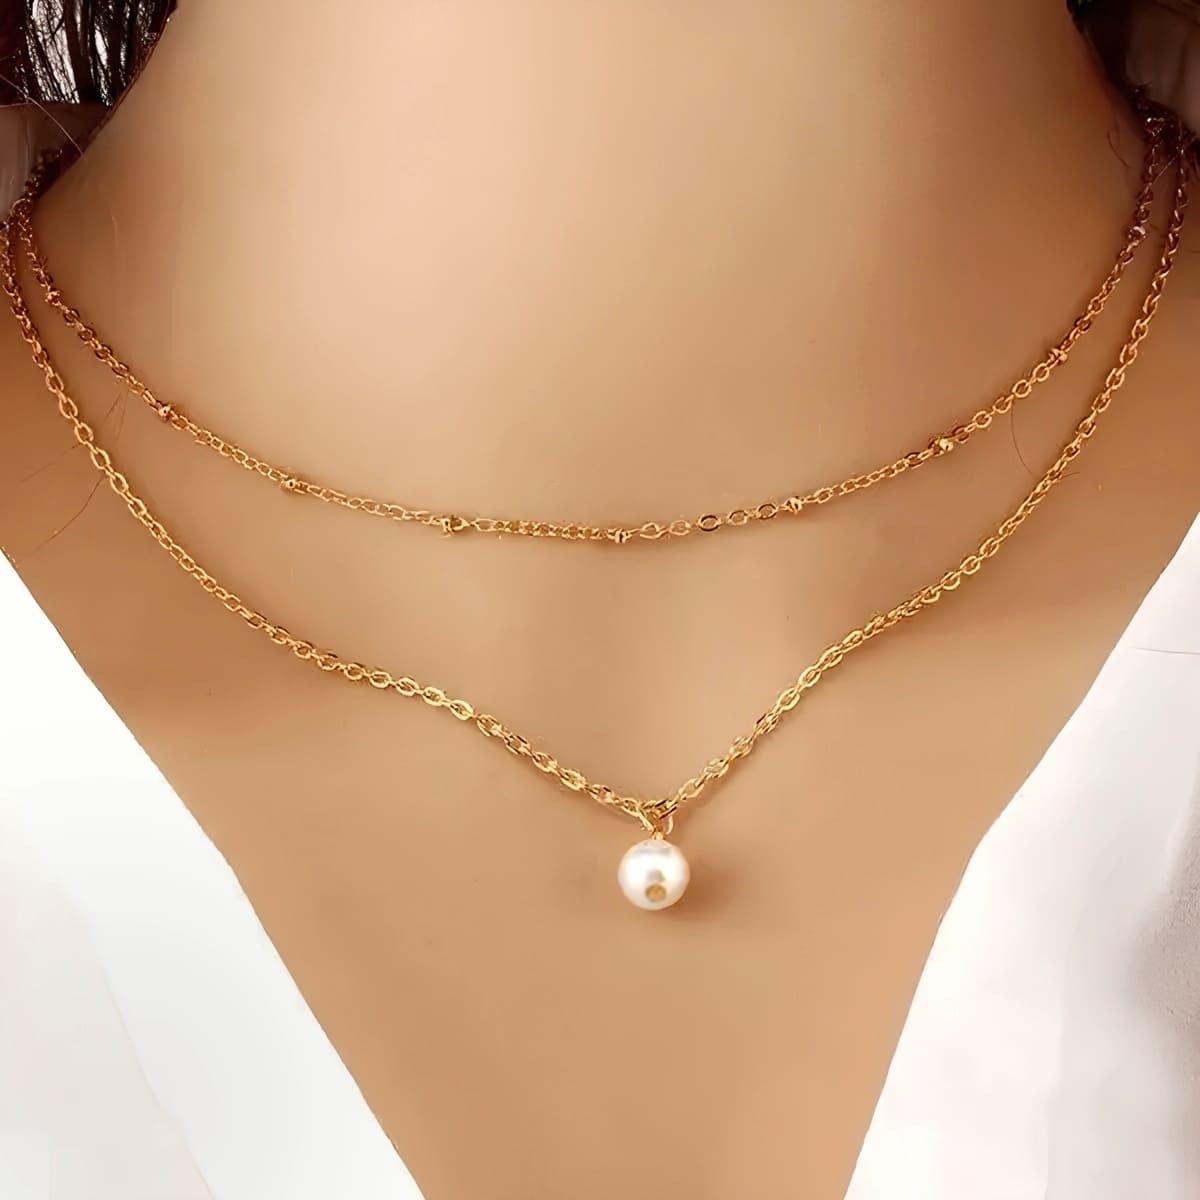 Dainty Pearl Choker, Delicate Pearl Choker, Delicate Pearl Necklace, Simple Pearl  Necklace, Short Layering Necklace, Gift for Mom, NS79 - Etsy | Single pearl  necklace, Simple pearl necklace, Pearl choker